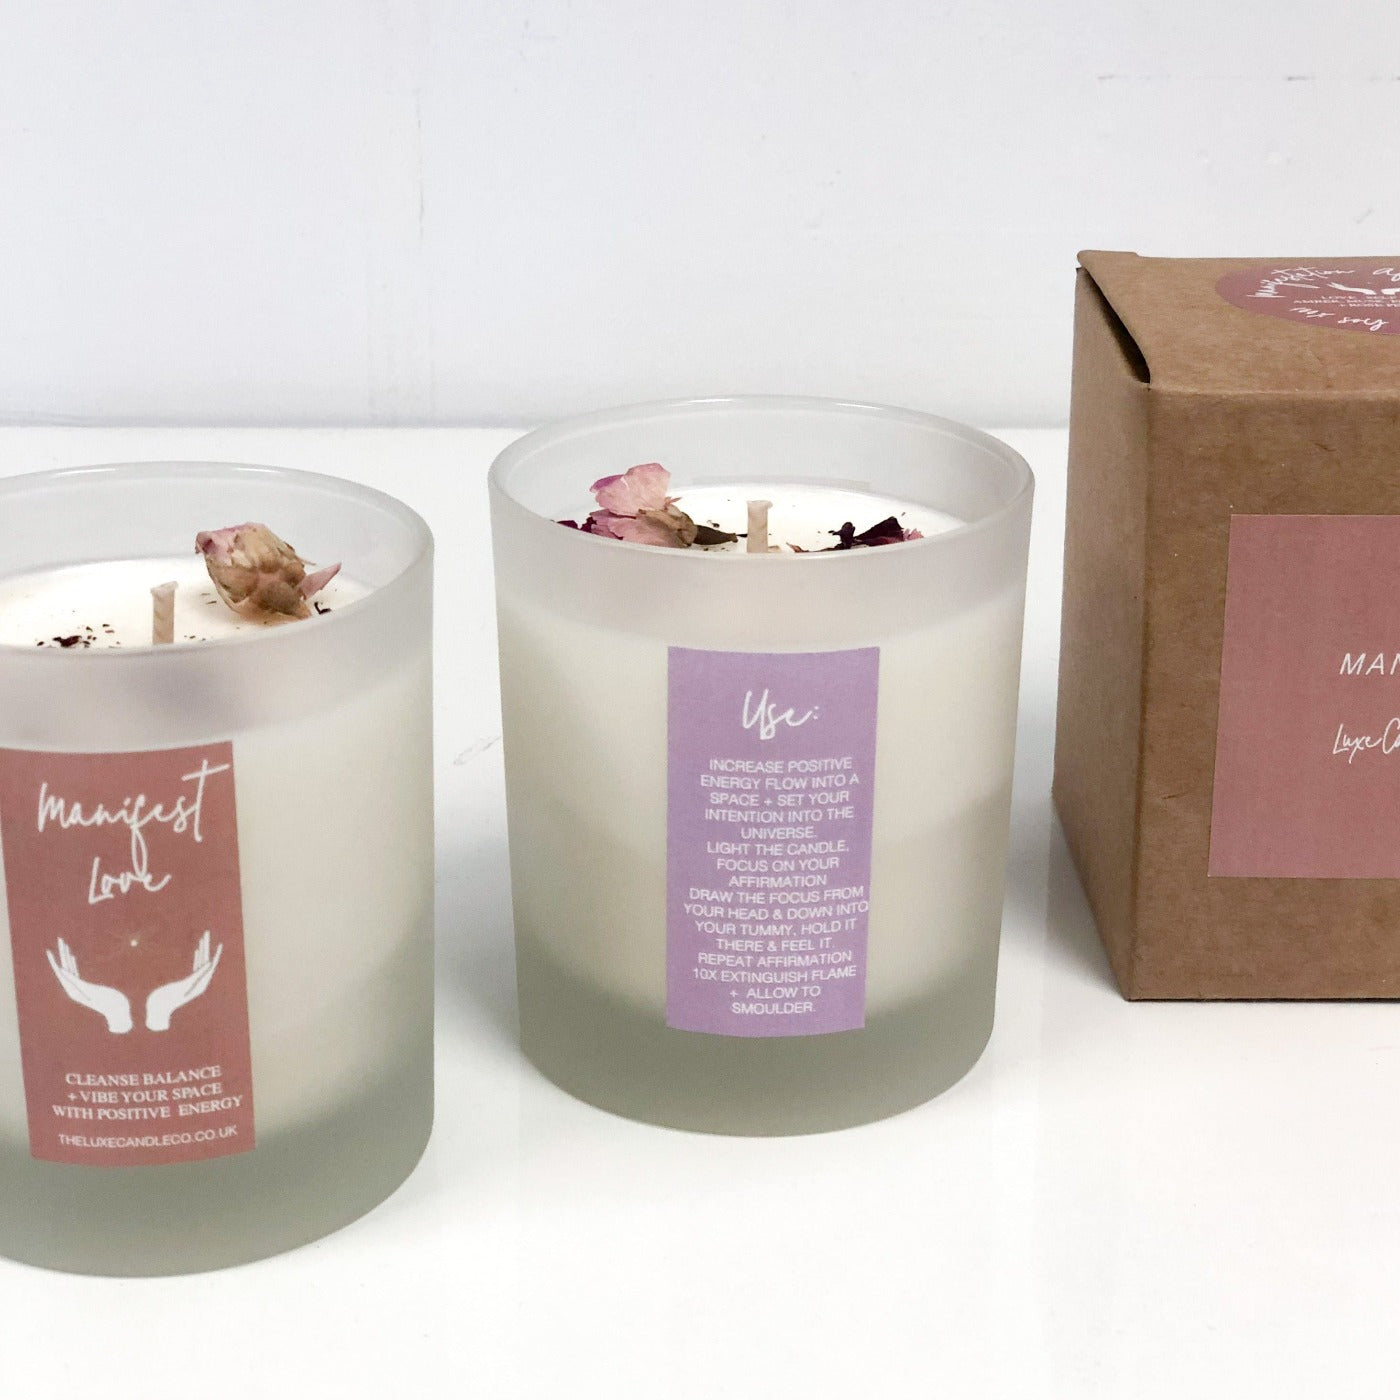 Gratitude candle by The Luxe Candle Co